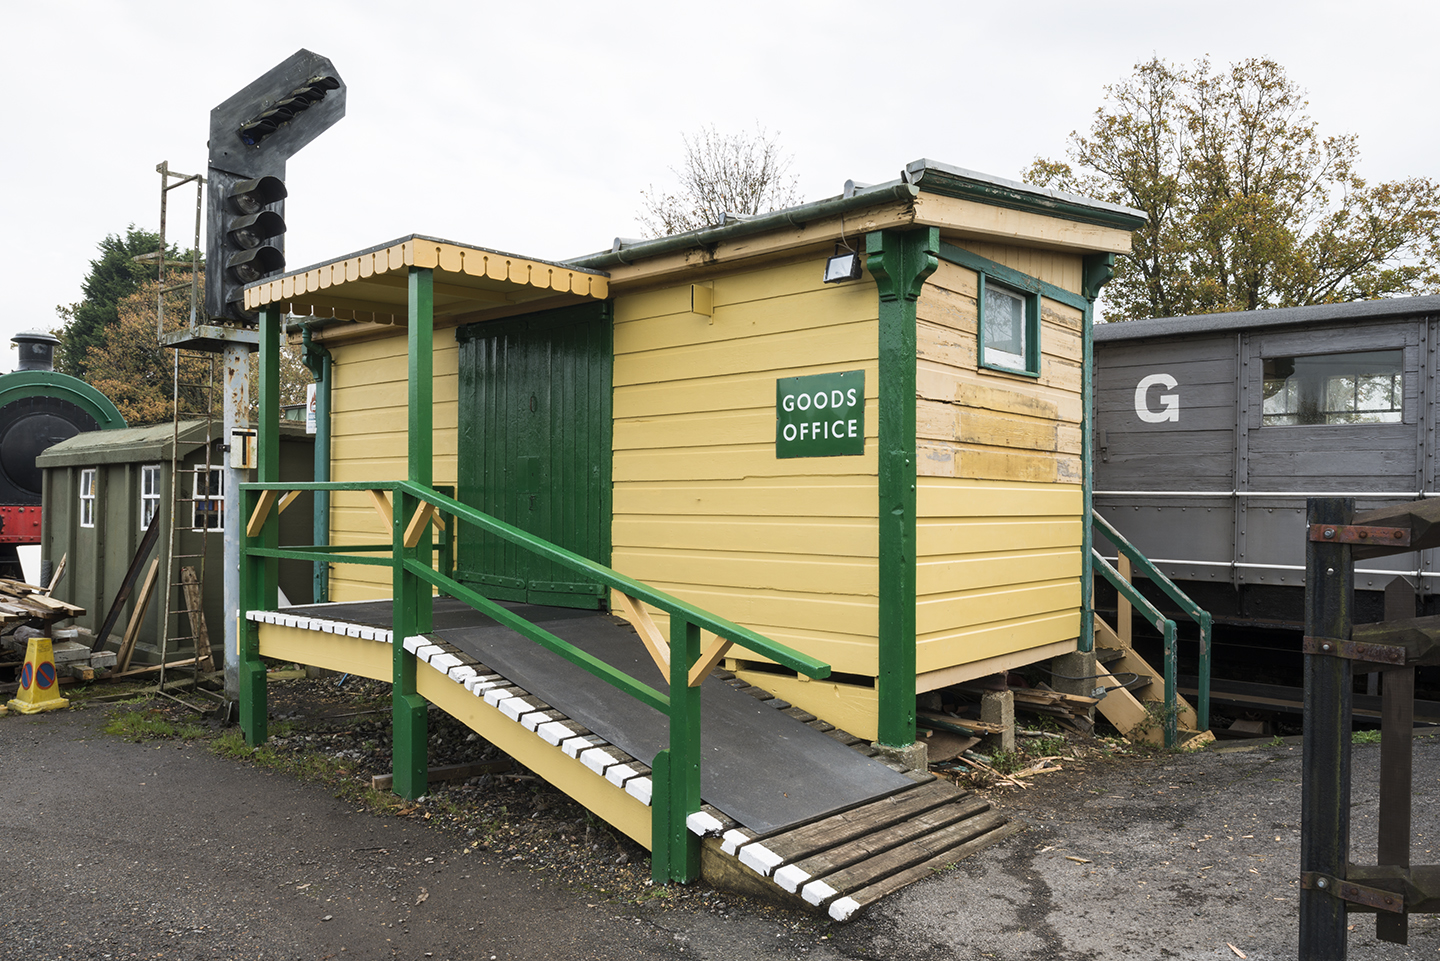 Isfield, one of the smallest types of goods shed, called a 'lock-up goods, built in 1898. The ramp and canopy were added after the site became a heritage railway.